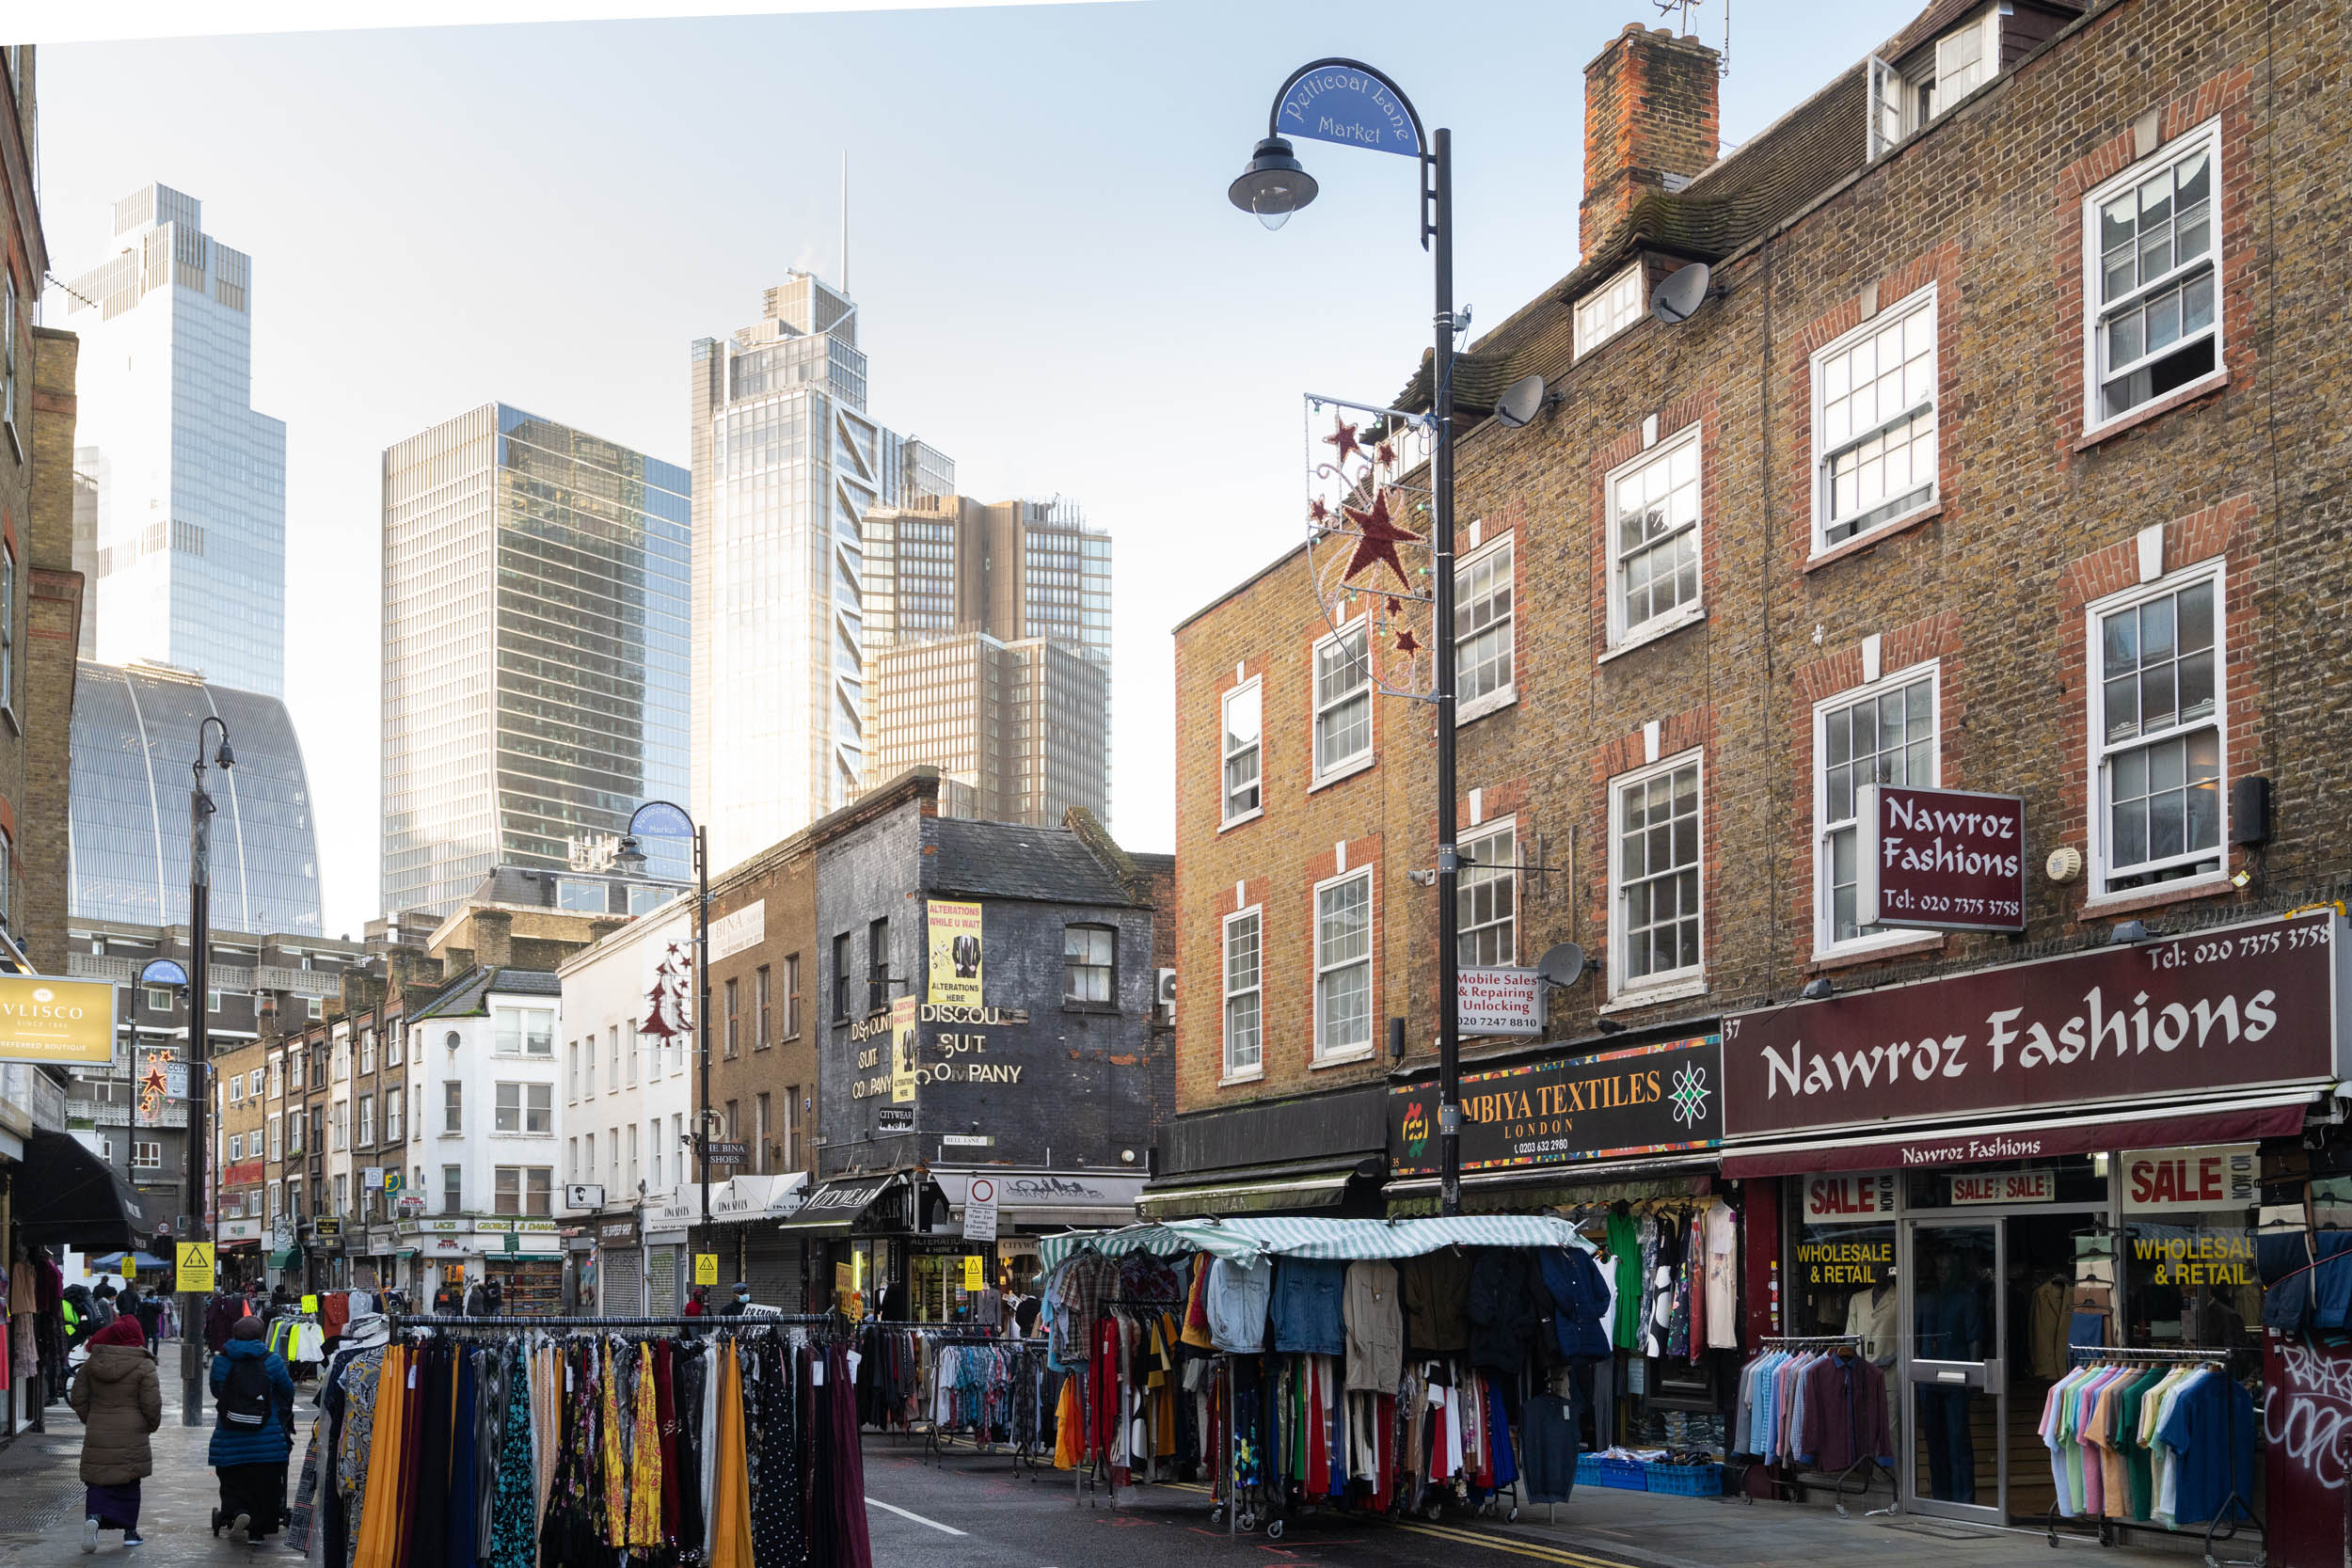 Historic England award £90,000 for Wentworth Street, Petticoat Lane cultural programme